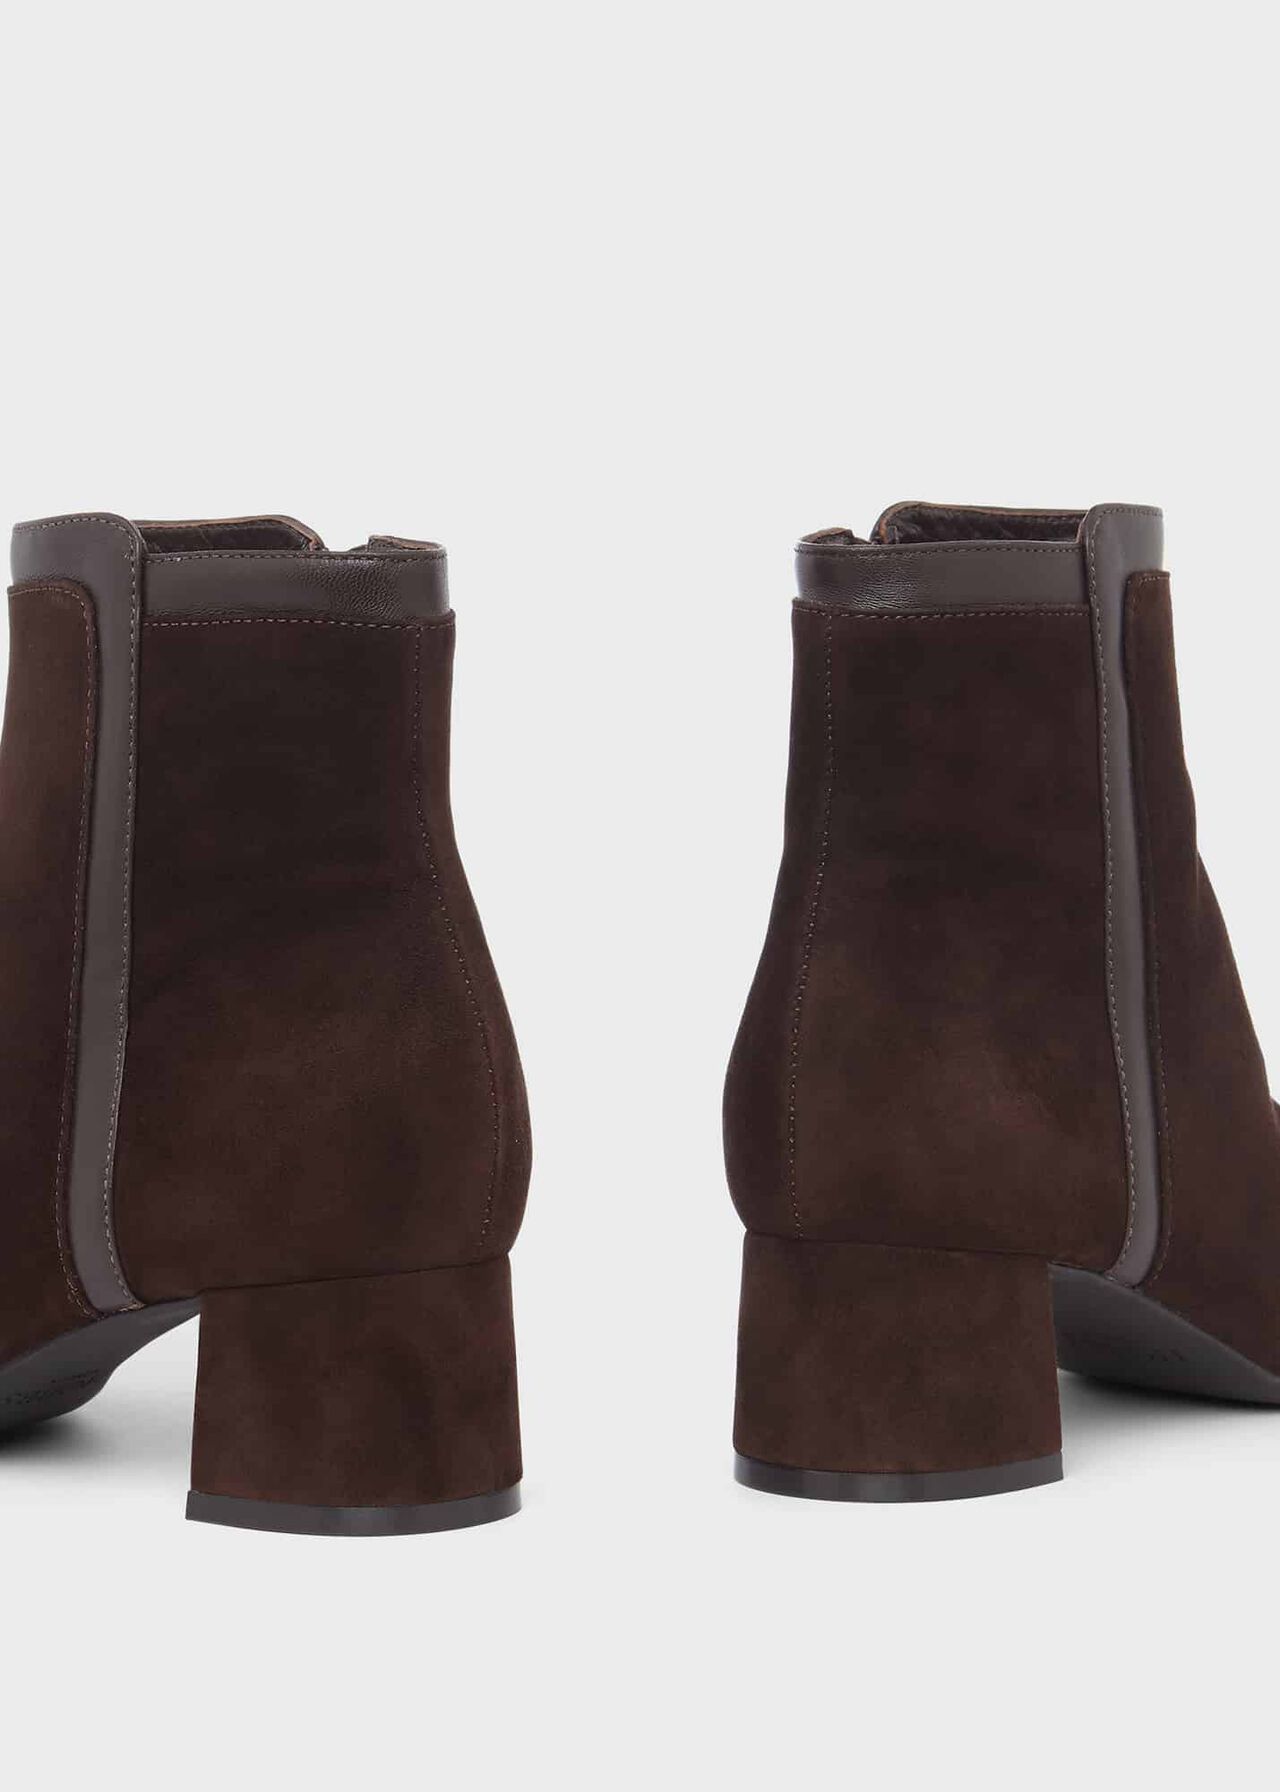 Iro Suede Ankle Boots, Dark Brown, hi-res